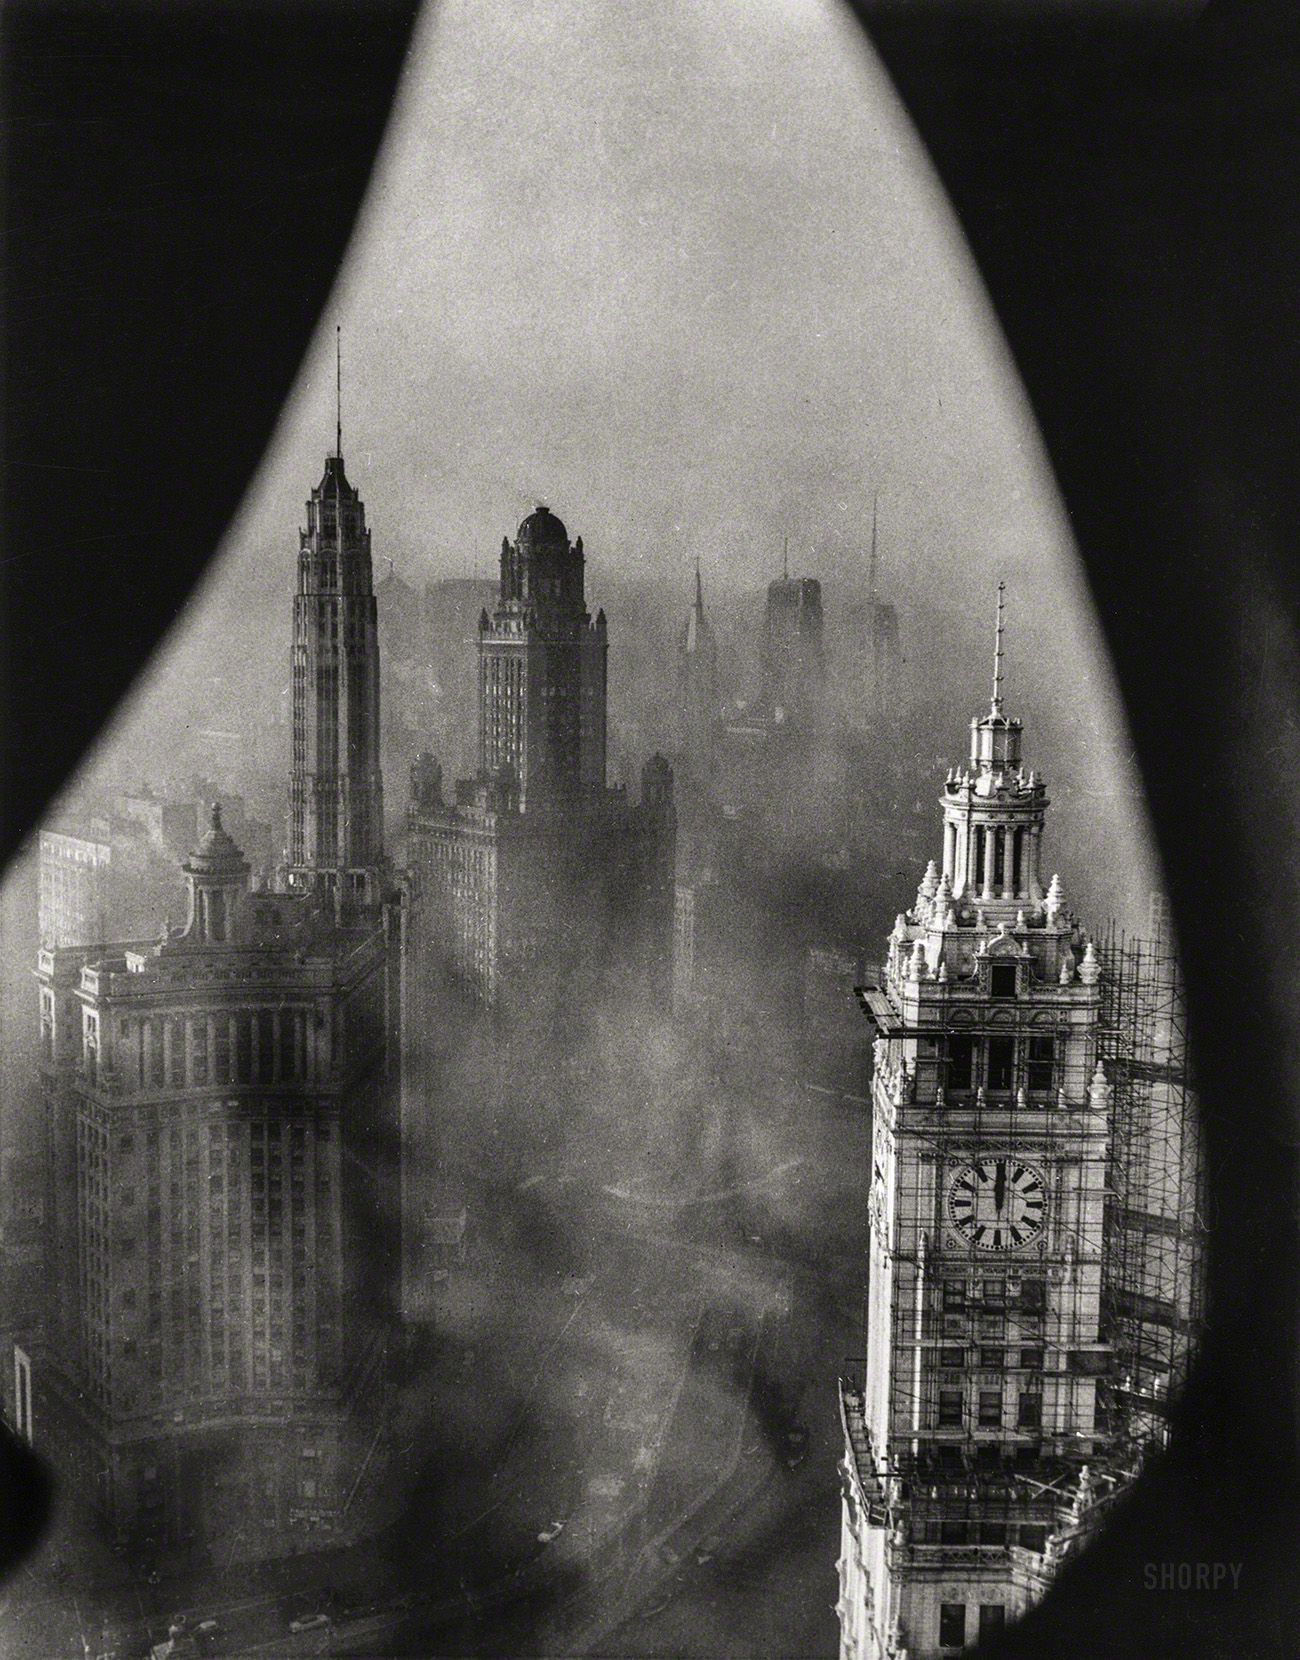 November 1, 1952. "Chicago framed by Gothic stonework high in the Tribune Tower. This view of Chicago's downtown shows the low-lying smog which blanketed the area one recent morning. In the foreground is the well-known Wrigley Building." Underwood & Underwood photo. View full size.